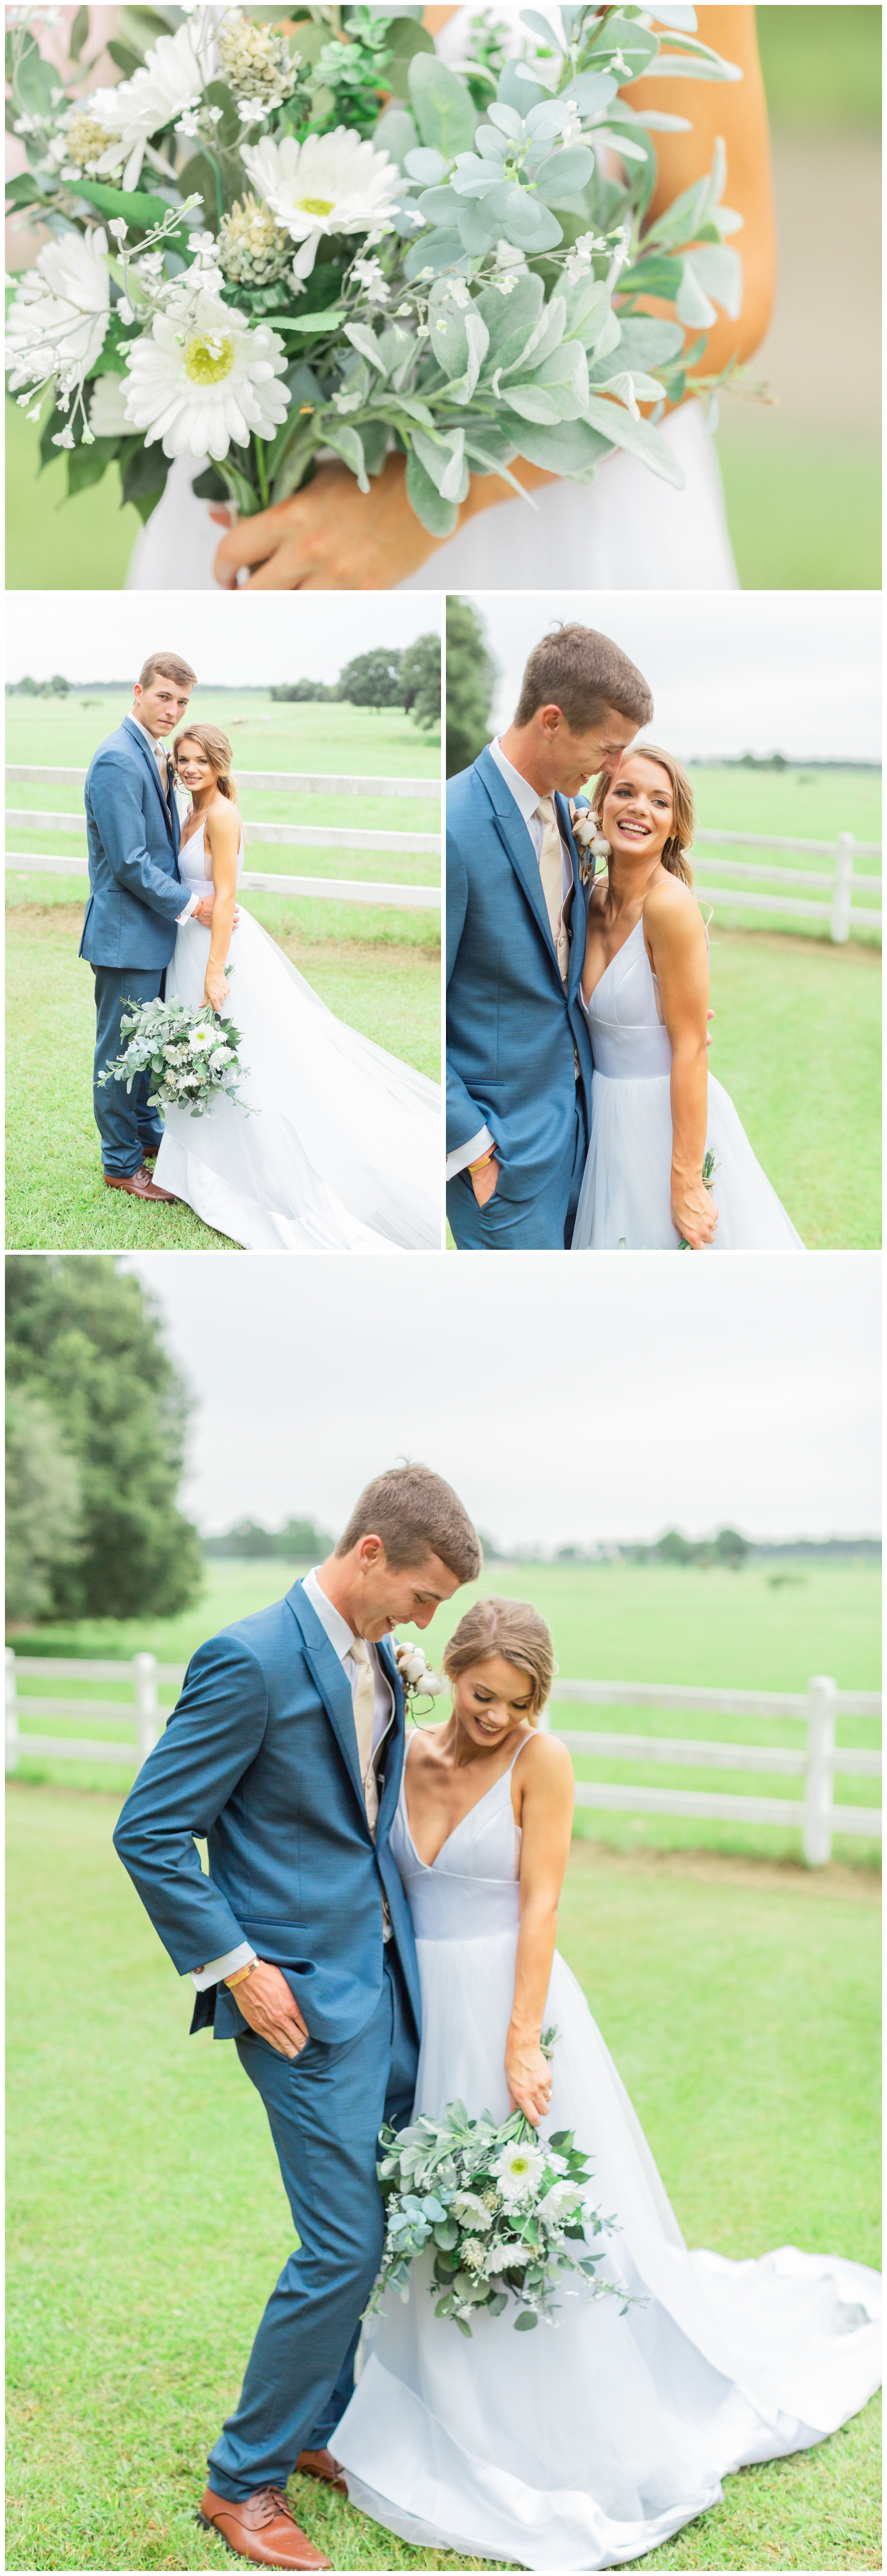 Atlanta_Wedding_Photographer_Engaged_Bride and Groom_Outdoor Portraits_Blue Suit